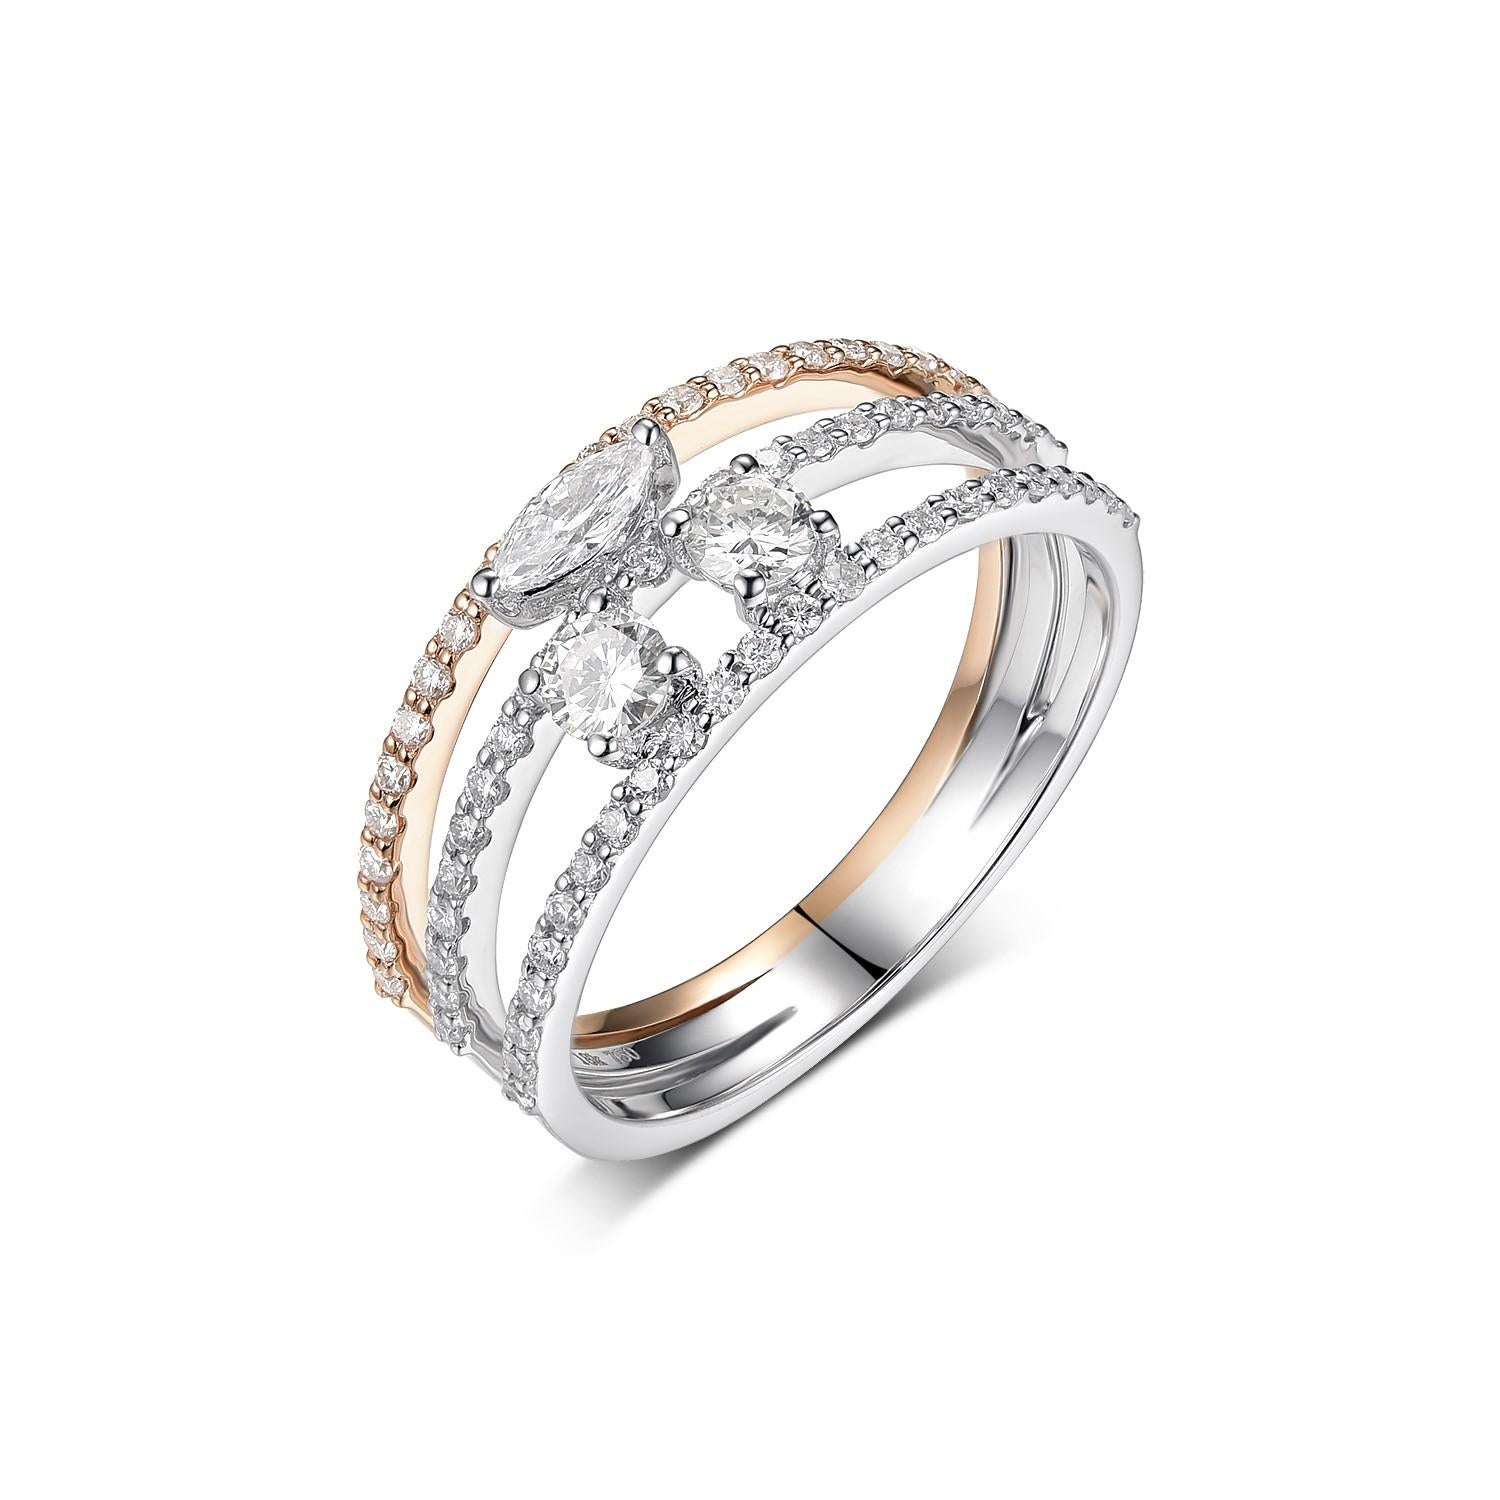 This ring features 2 fancy color diamonds weight 0.22 carat and 1 marquise diamonds weight 0.10 carat. Fancy cut diamonds are set in 18 karat rose gold. Assented with 0.36 carat of white round cut diamonds. 

US 7    Ring band width:7.7mm
Resizing